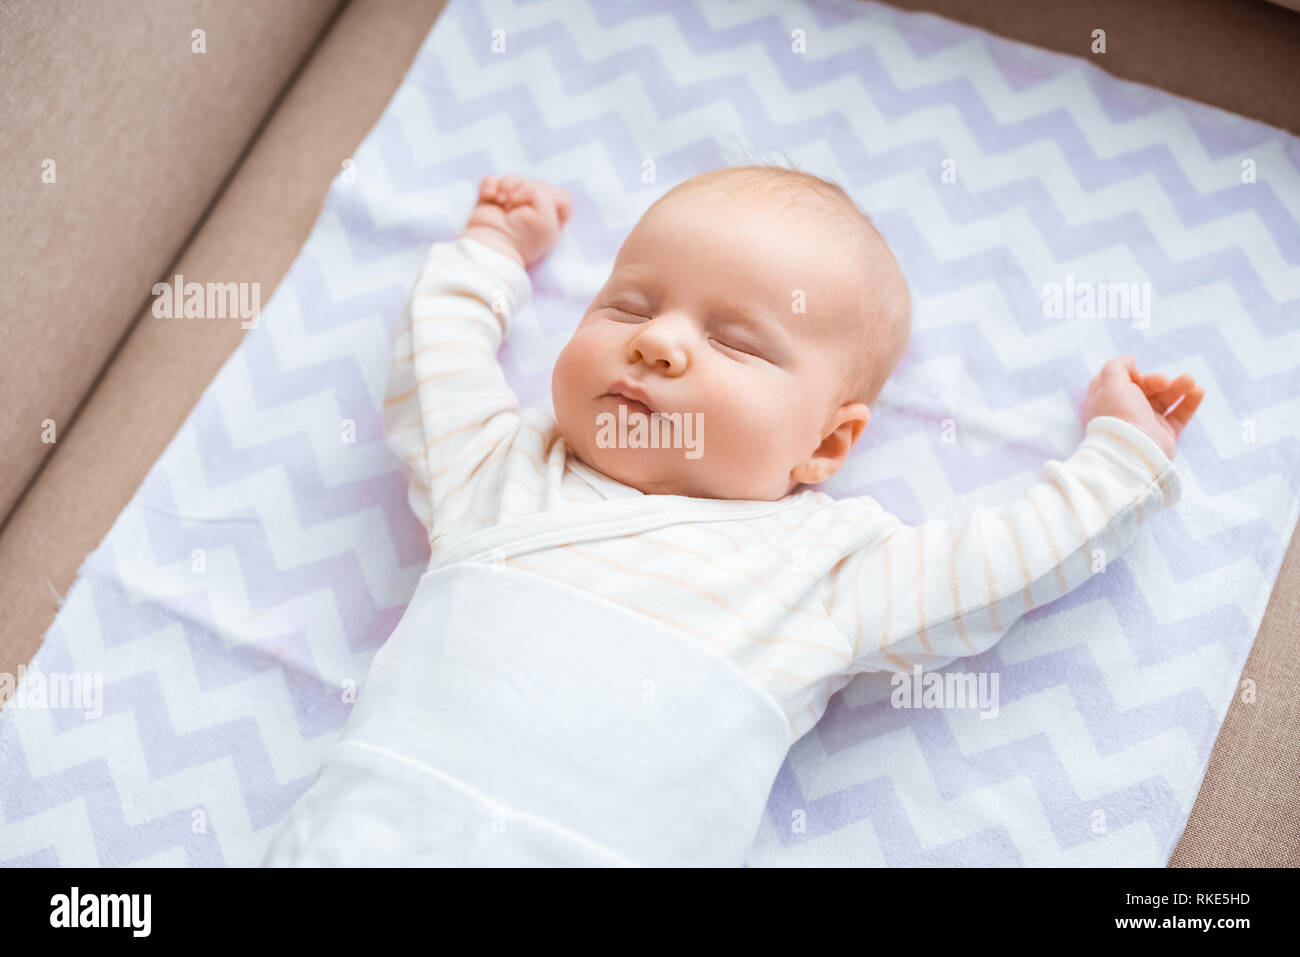 adorable baby with closed eyes and raised hands lying on couch Stock Photo